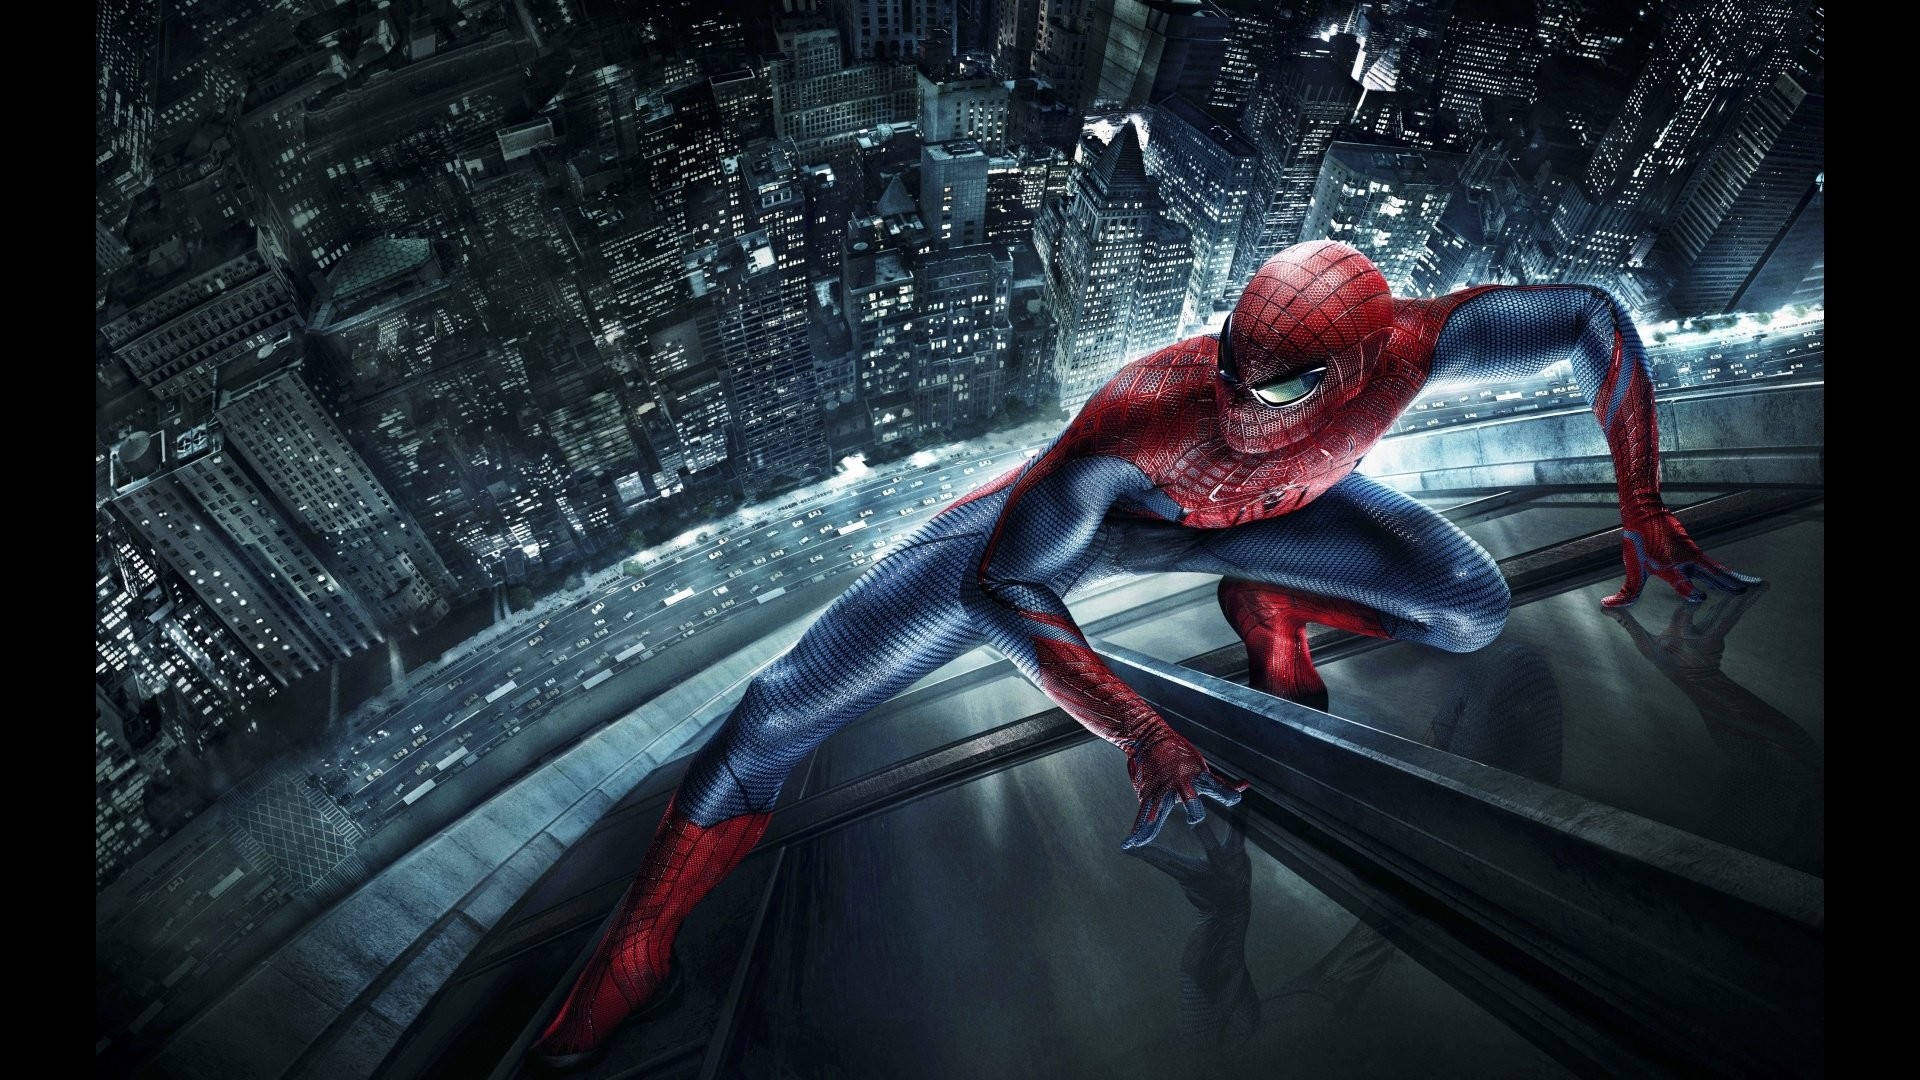 The 25 best Spiderman hd ideas on Pinterest Avengers hd, Andrew Garfield sin camisa and Amazing spiderman